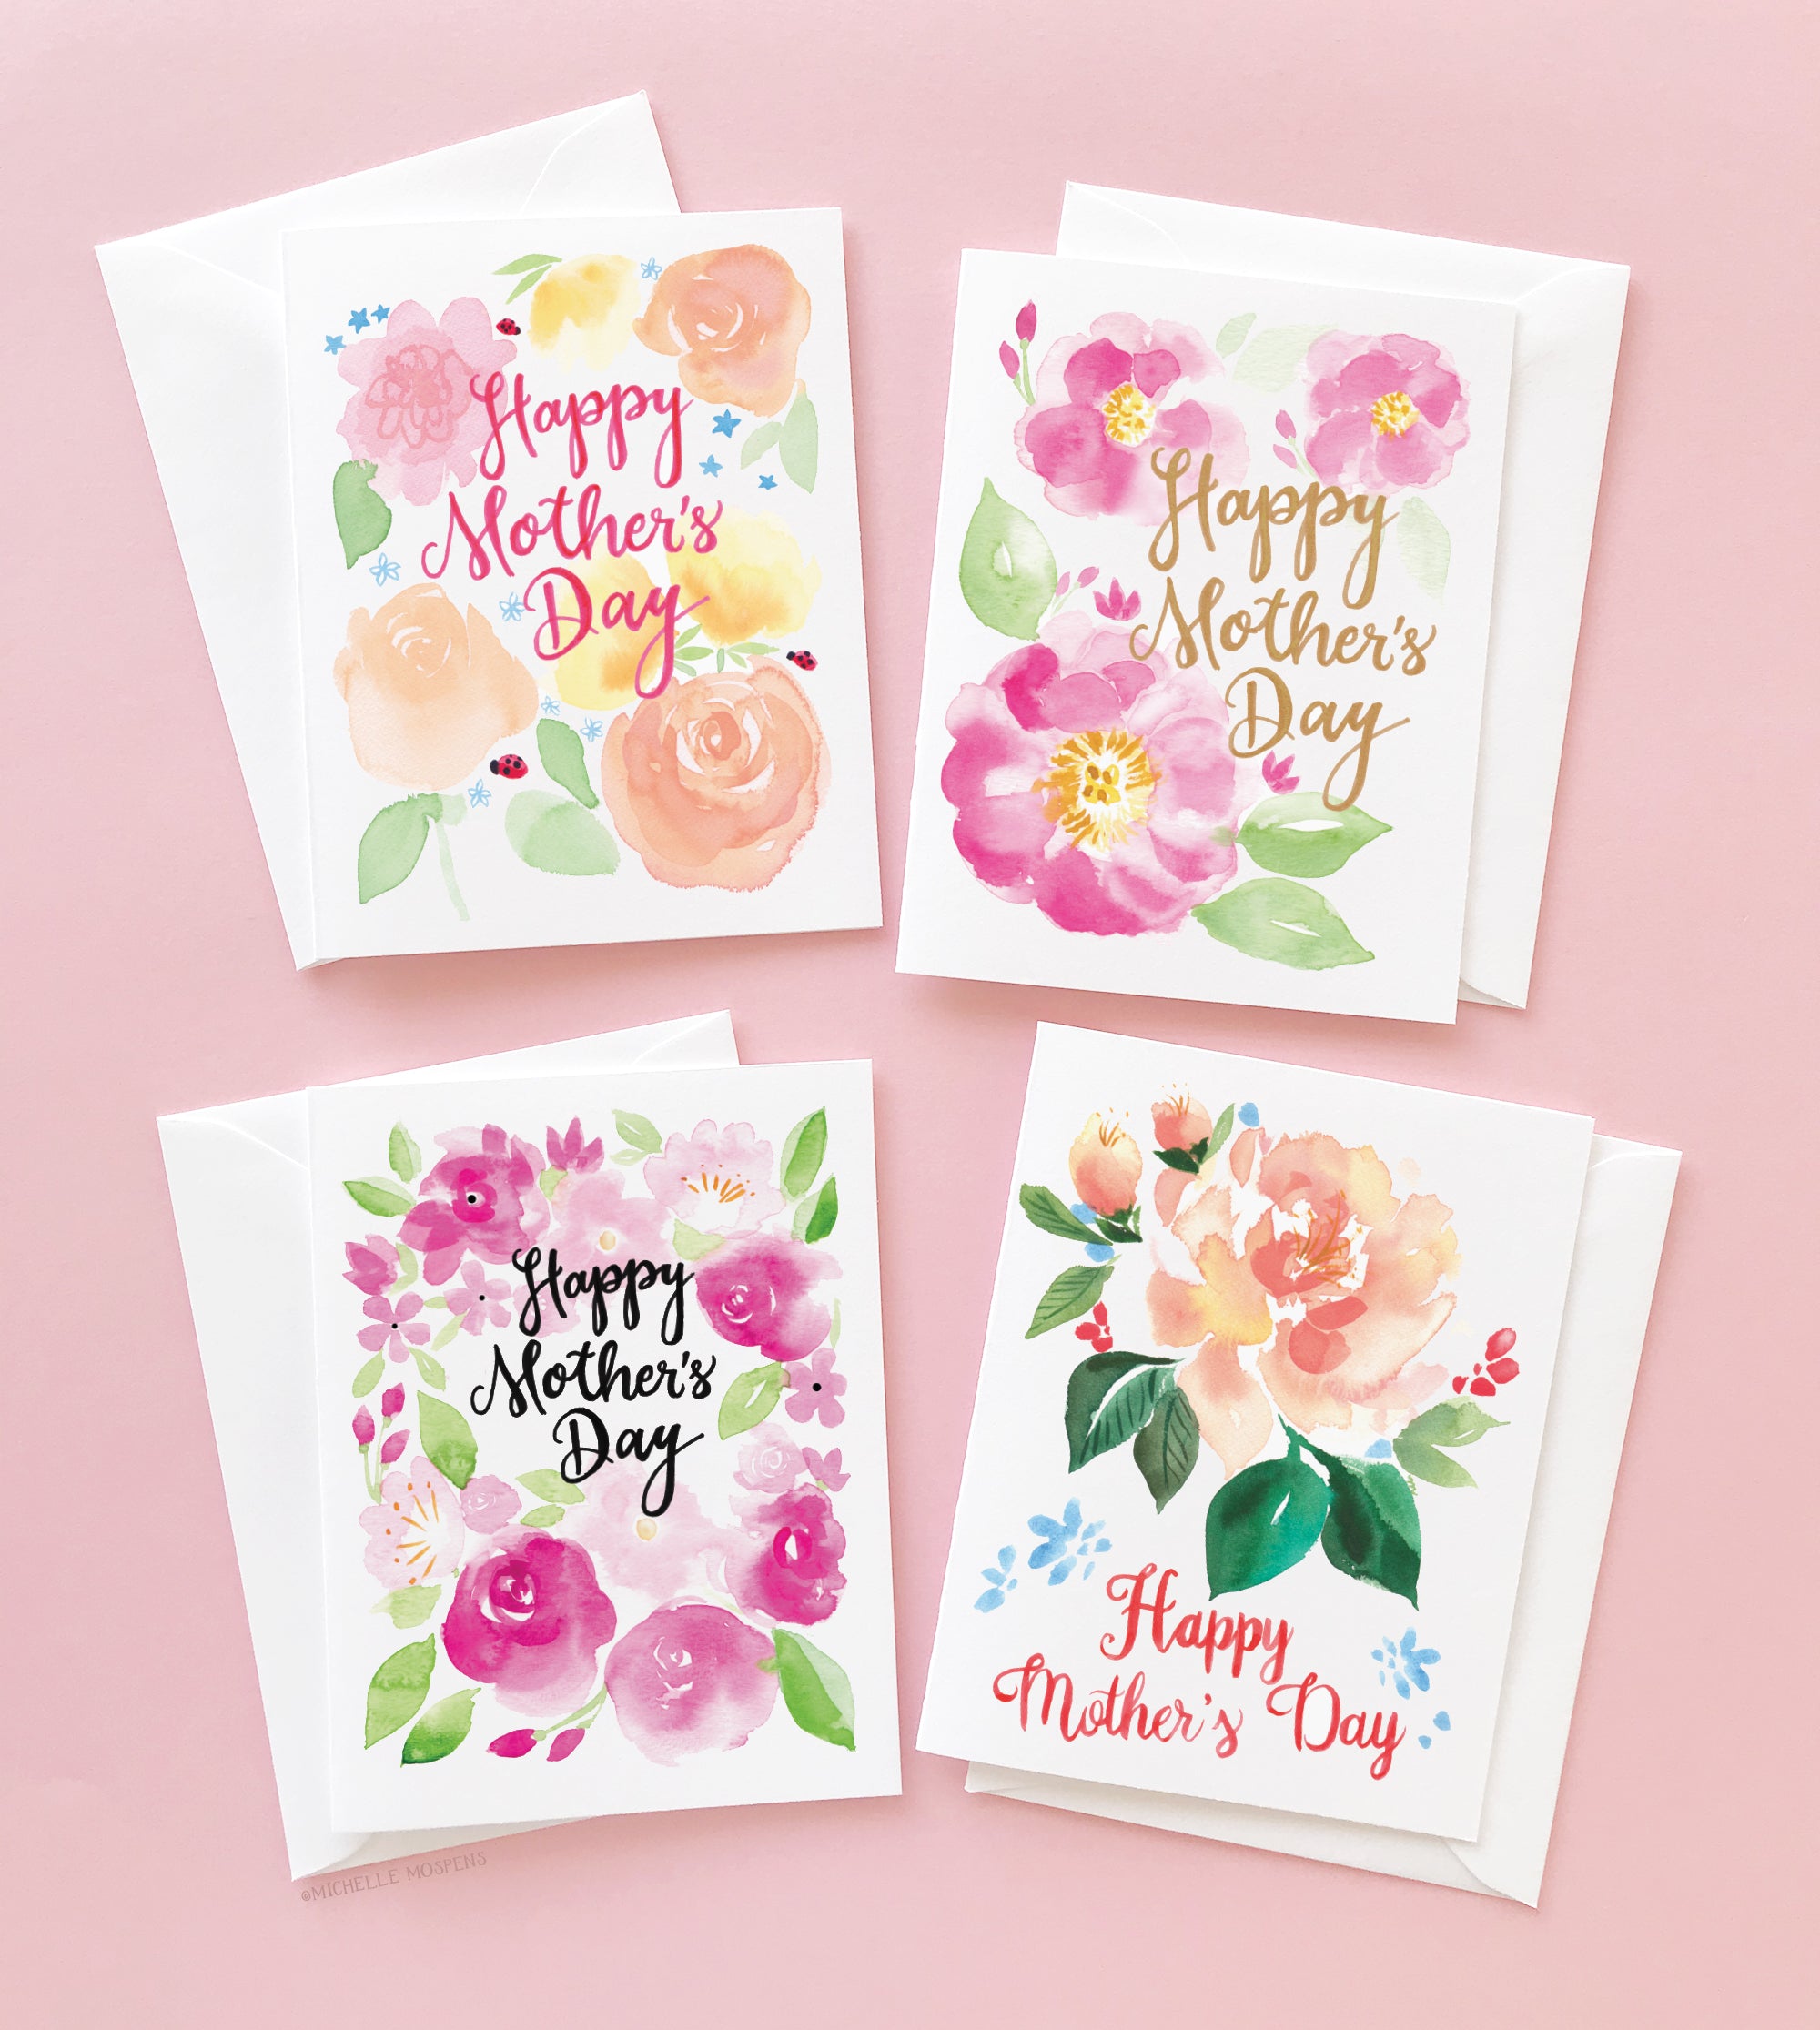 Floral Blooms Mother's Day Cards Set by Michelle Mospens